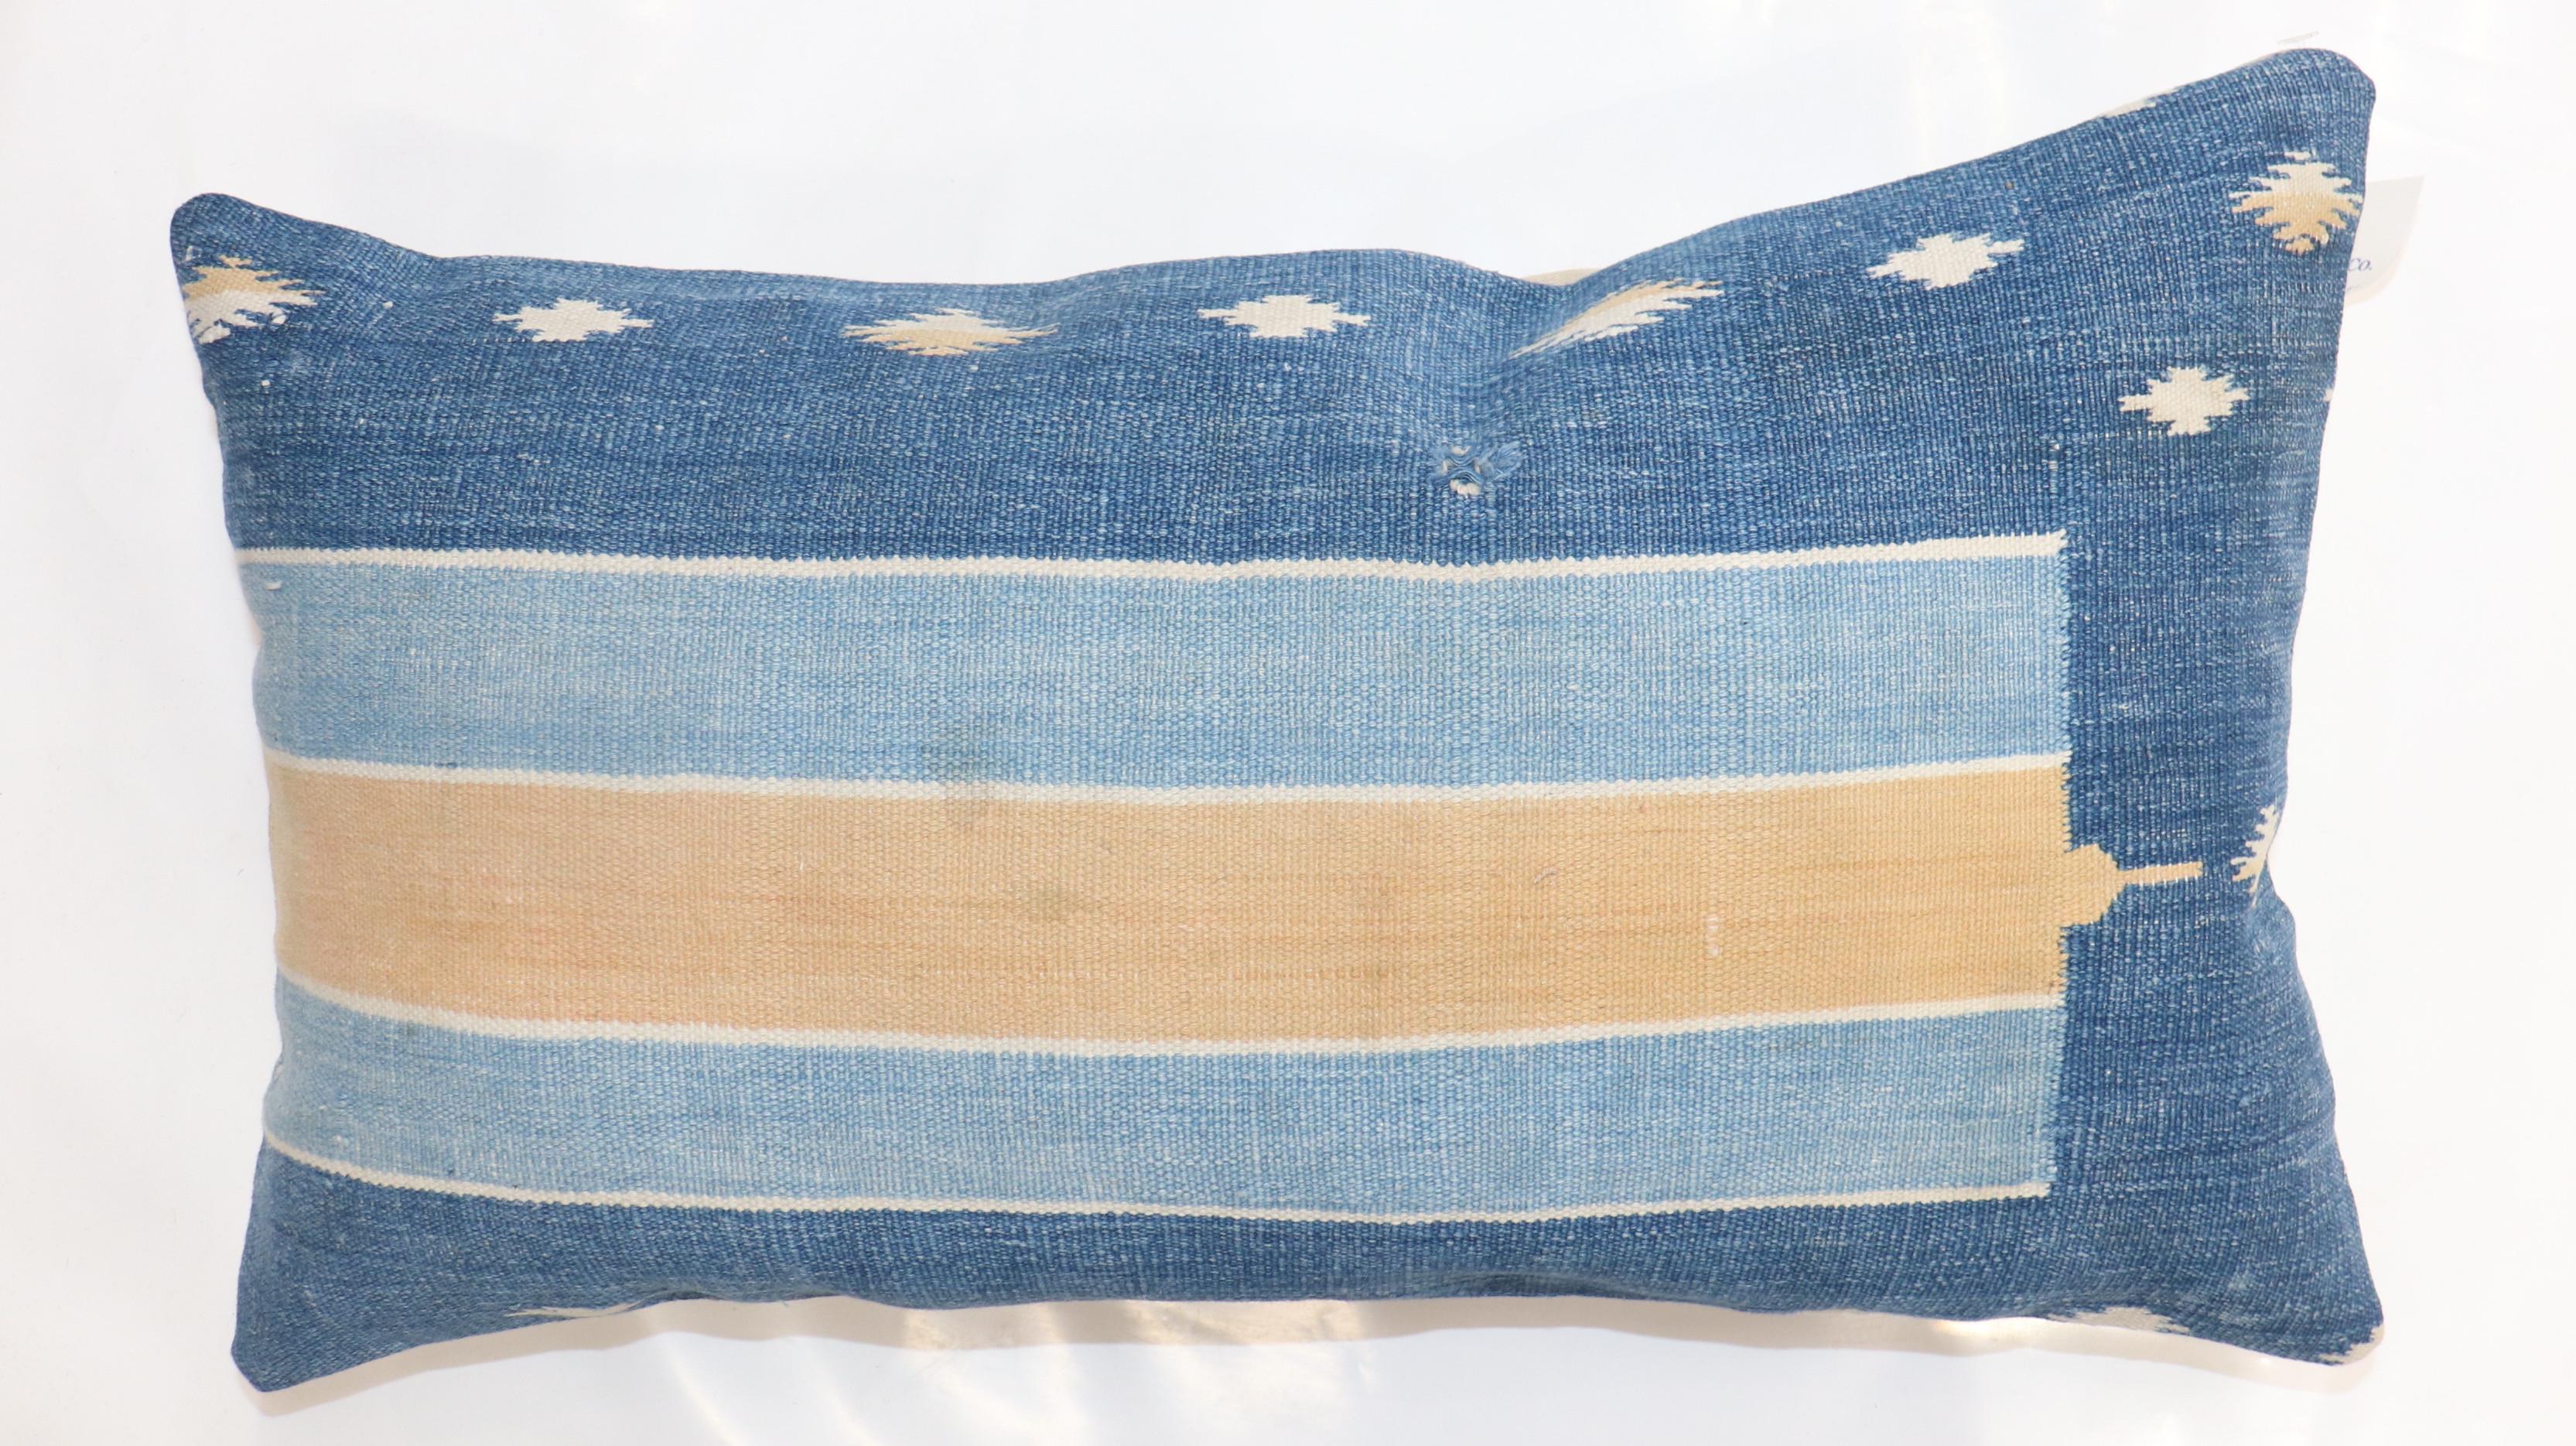 Pillow made from an early 20th century Indian Jail Dhurrie Flat-woven Rug

Measures: 12' x 21''.